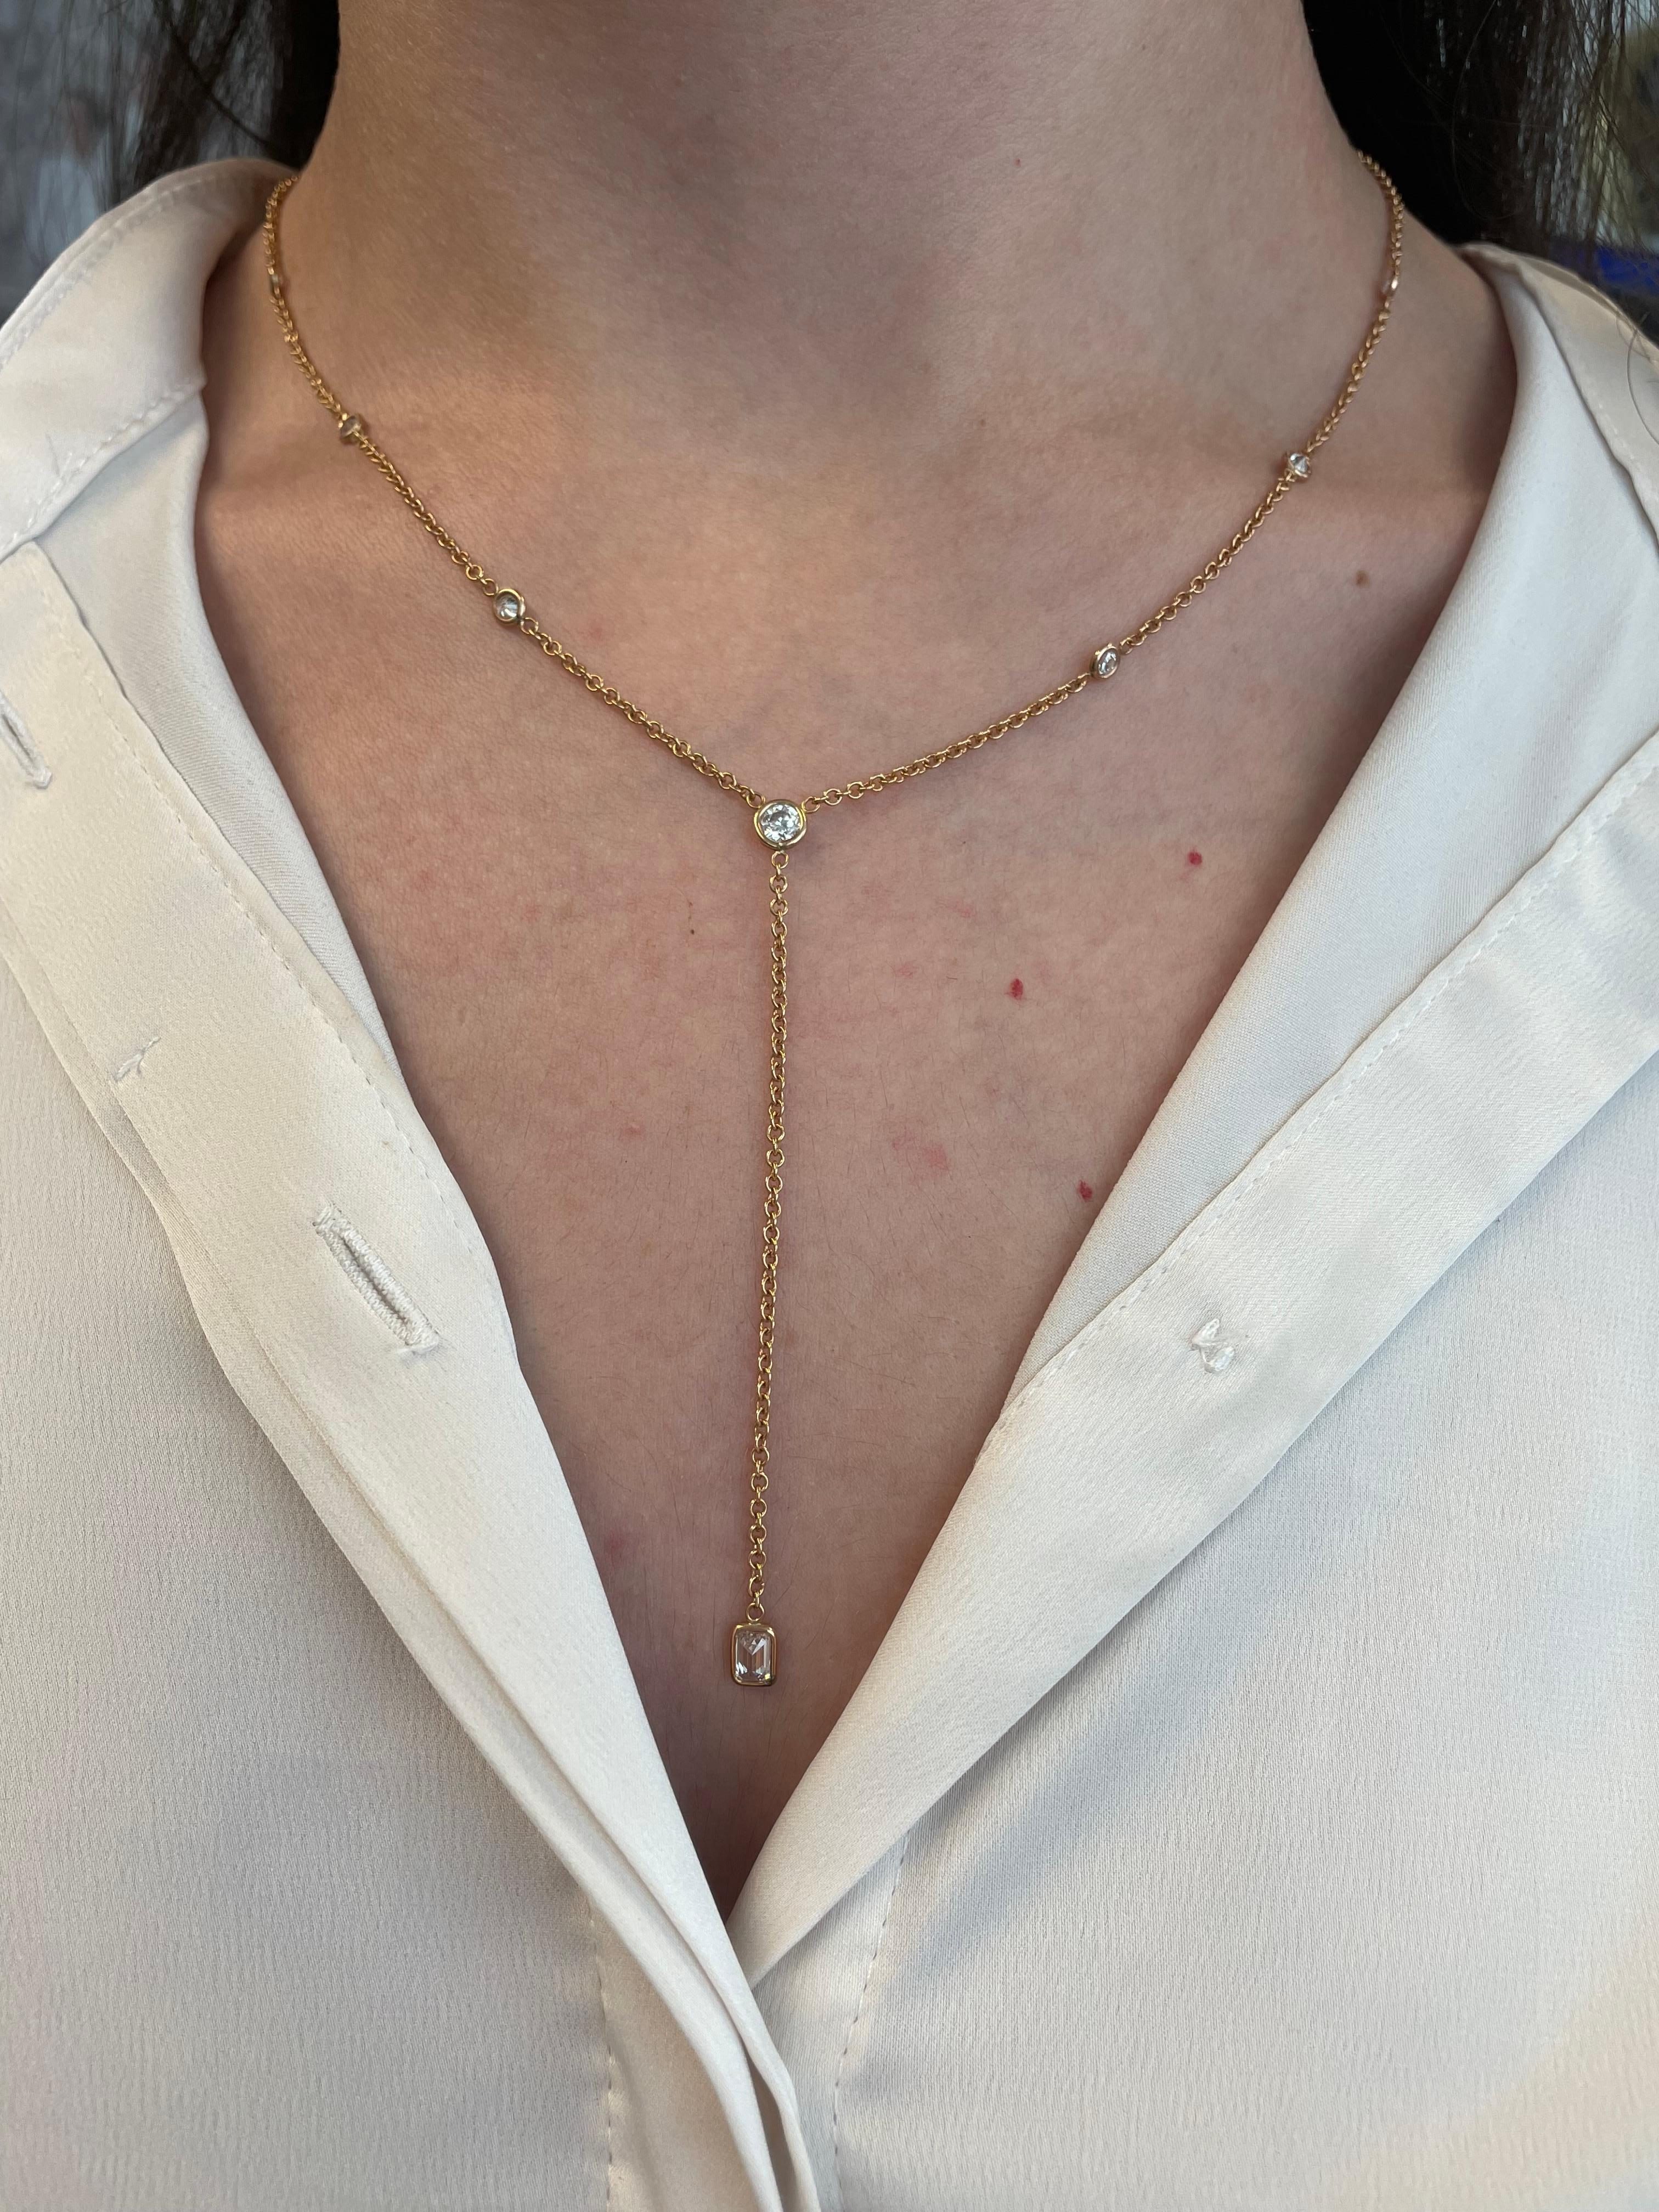 Exquisite round & emerald cut diamonds by the yard necklace, with drop. By Alexander Beverly Hills.
8 total diamonds, 1.26 carats total. 1 emerald cut diamond, 0.38ct. Approximately G/H color and VS clarity. 7 round brilliant diamonds, 0.88 carats.